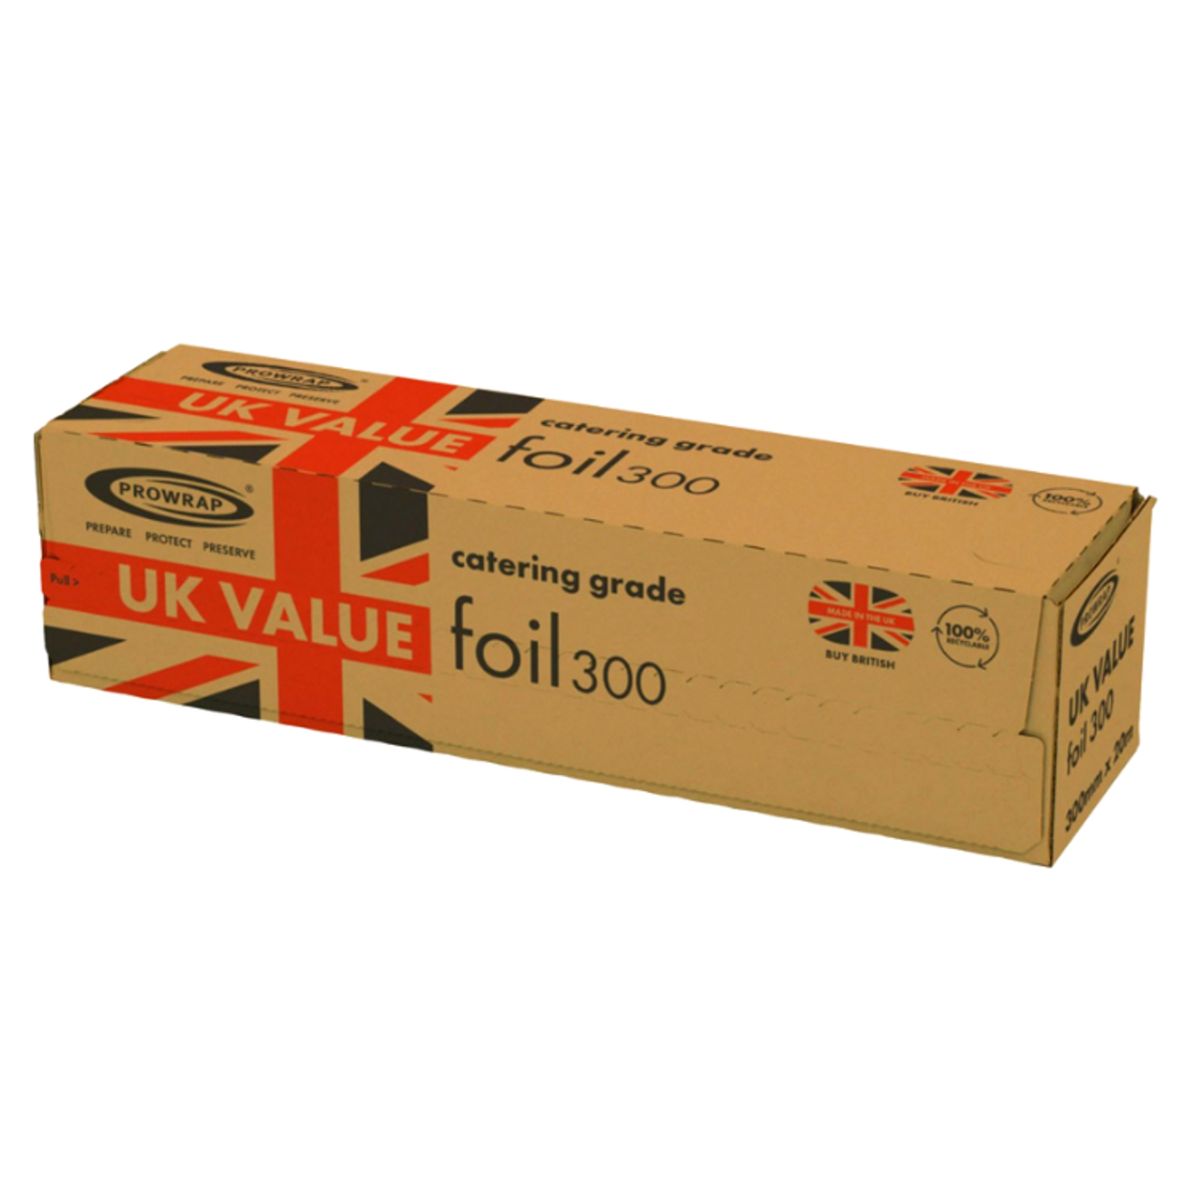 A box with Prowrap - Value Catering Aluminium Foil 300 - 300mm x 20m on it.